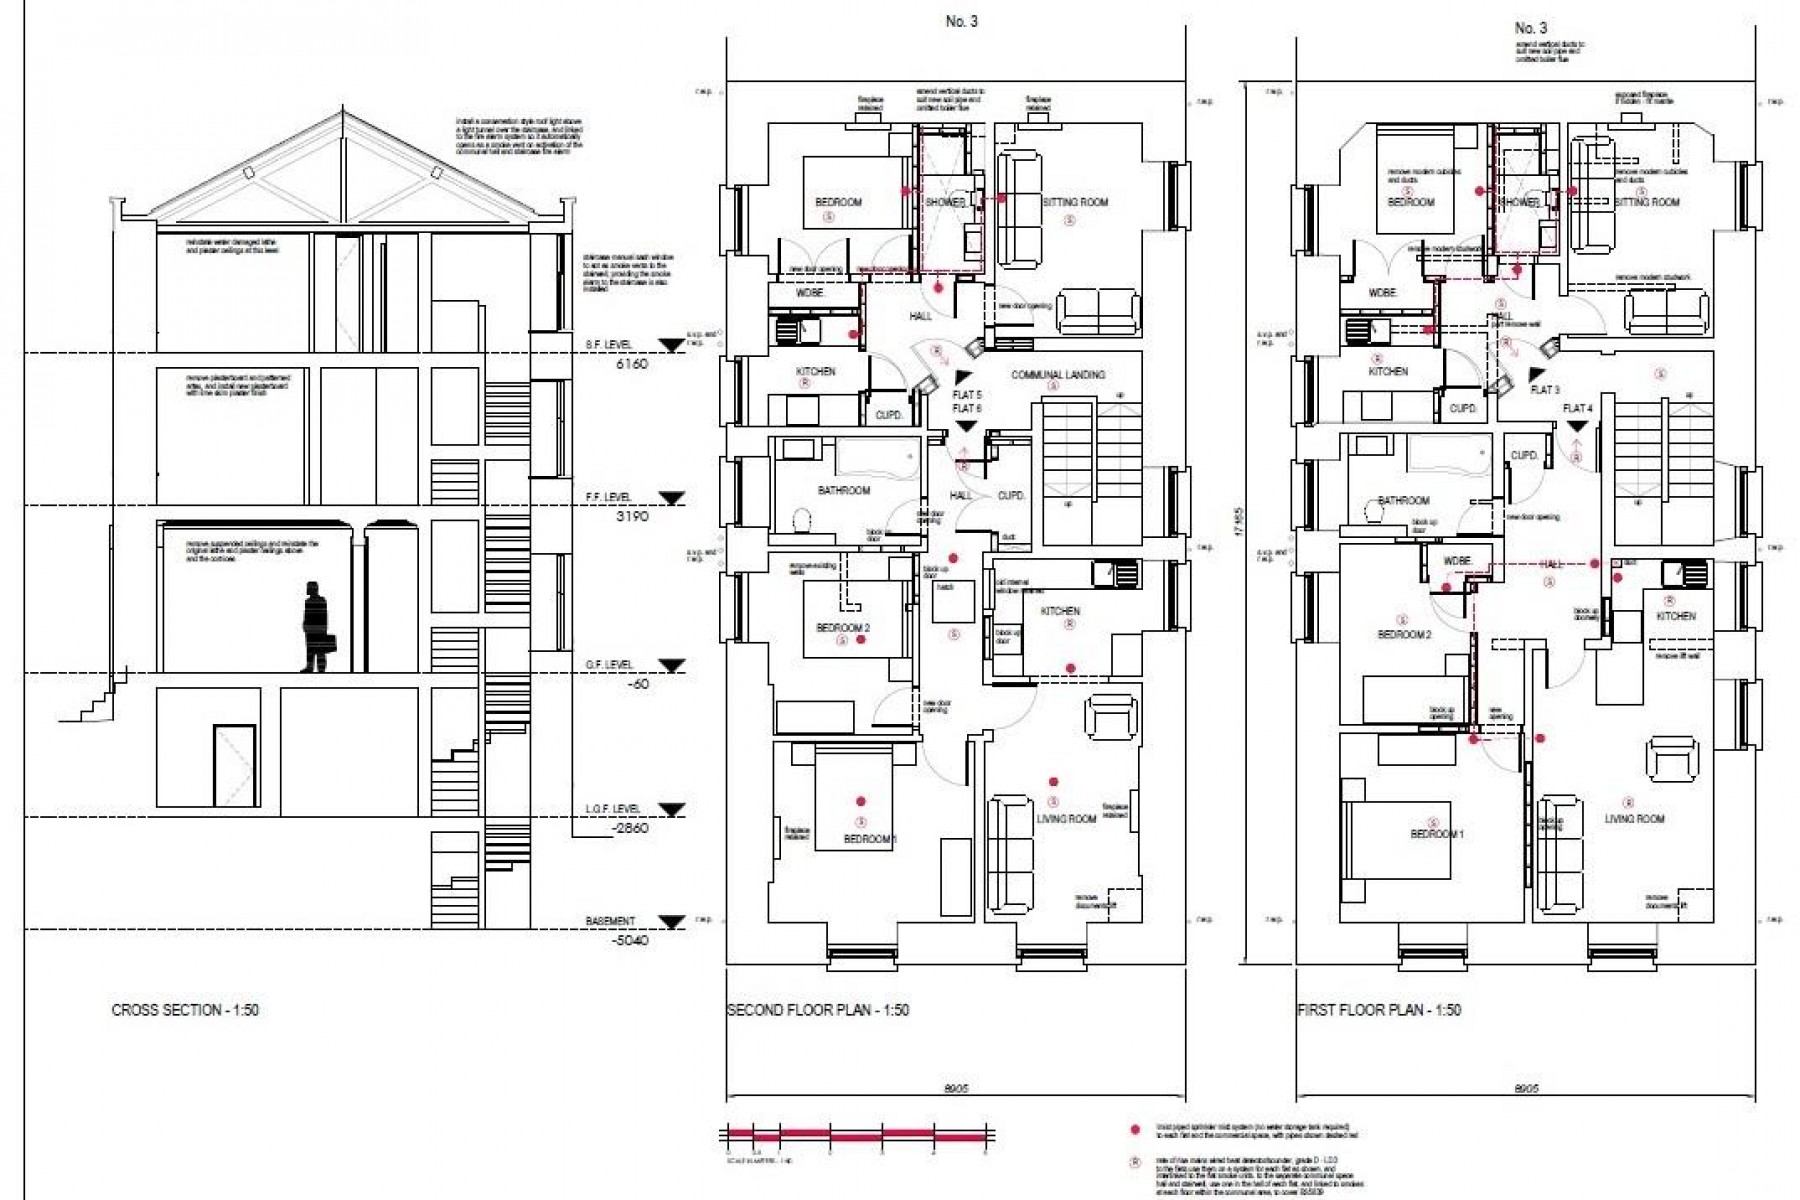 Images for PLANNING GRANTED - 6 FLATS + RETAIL - GDV £1,1m